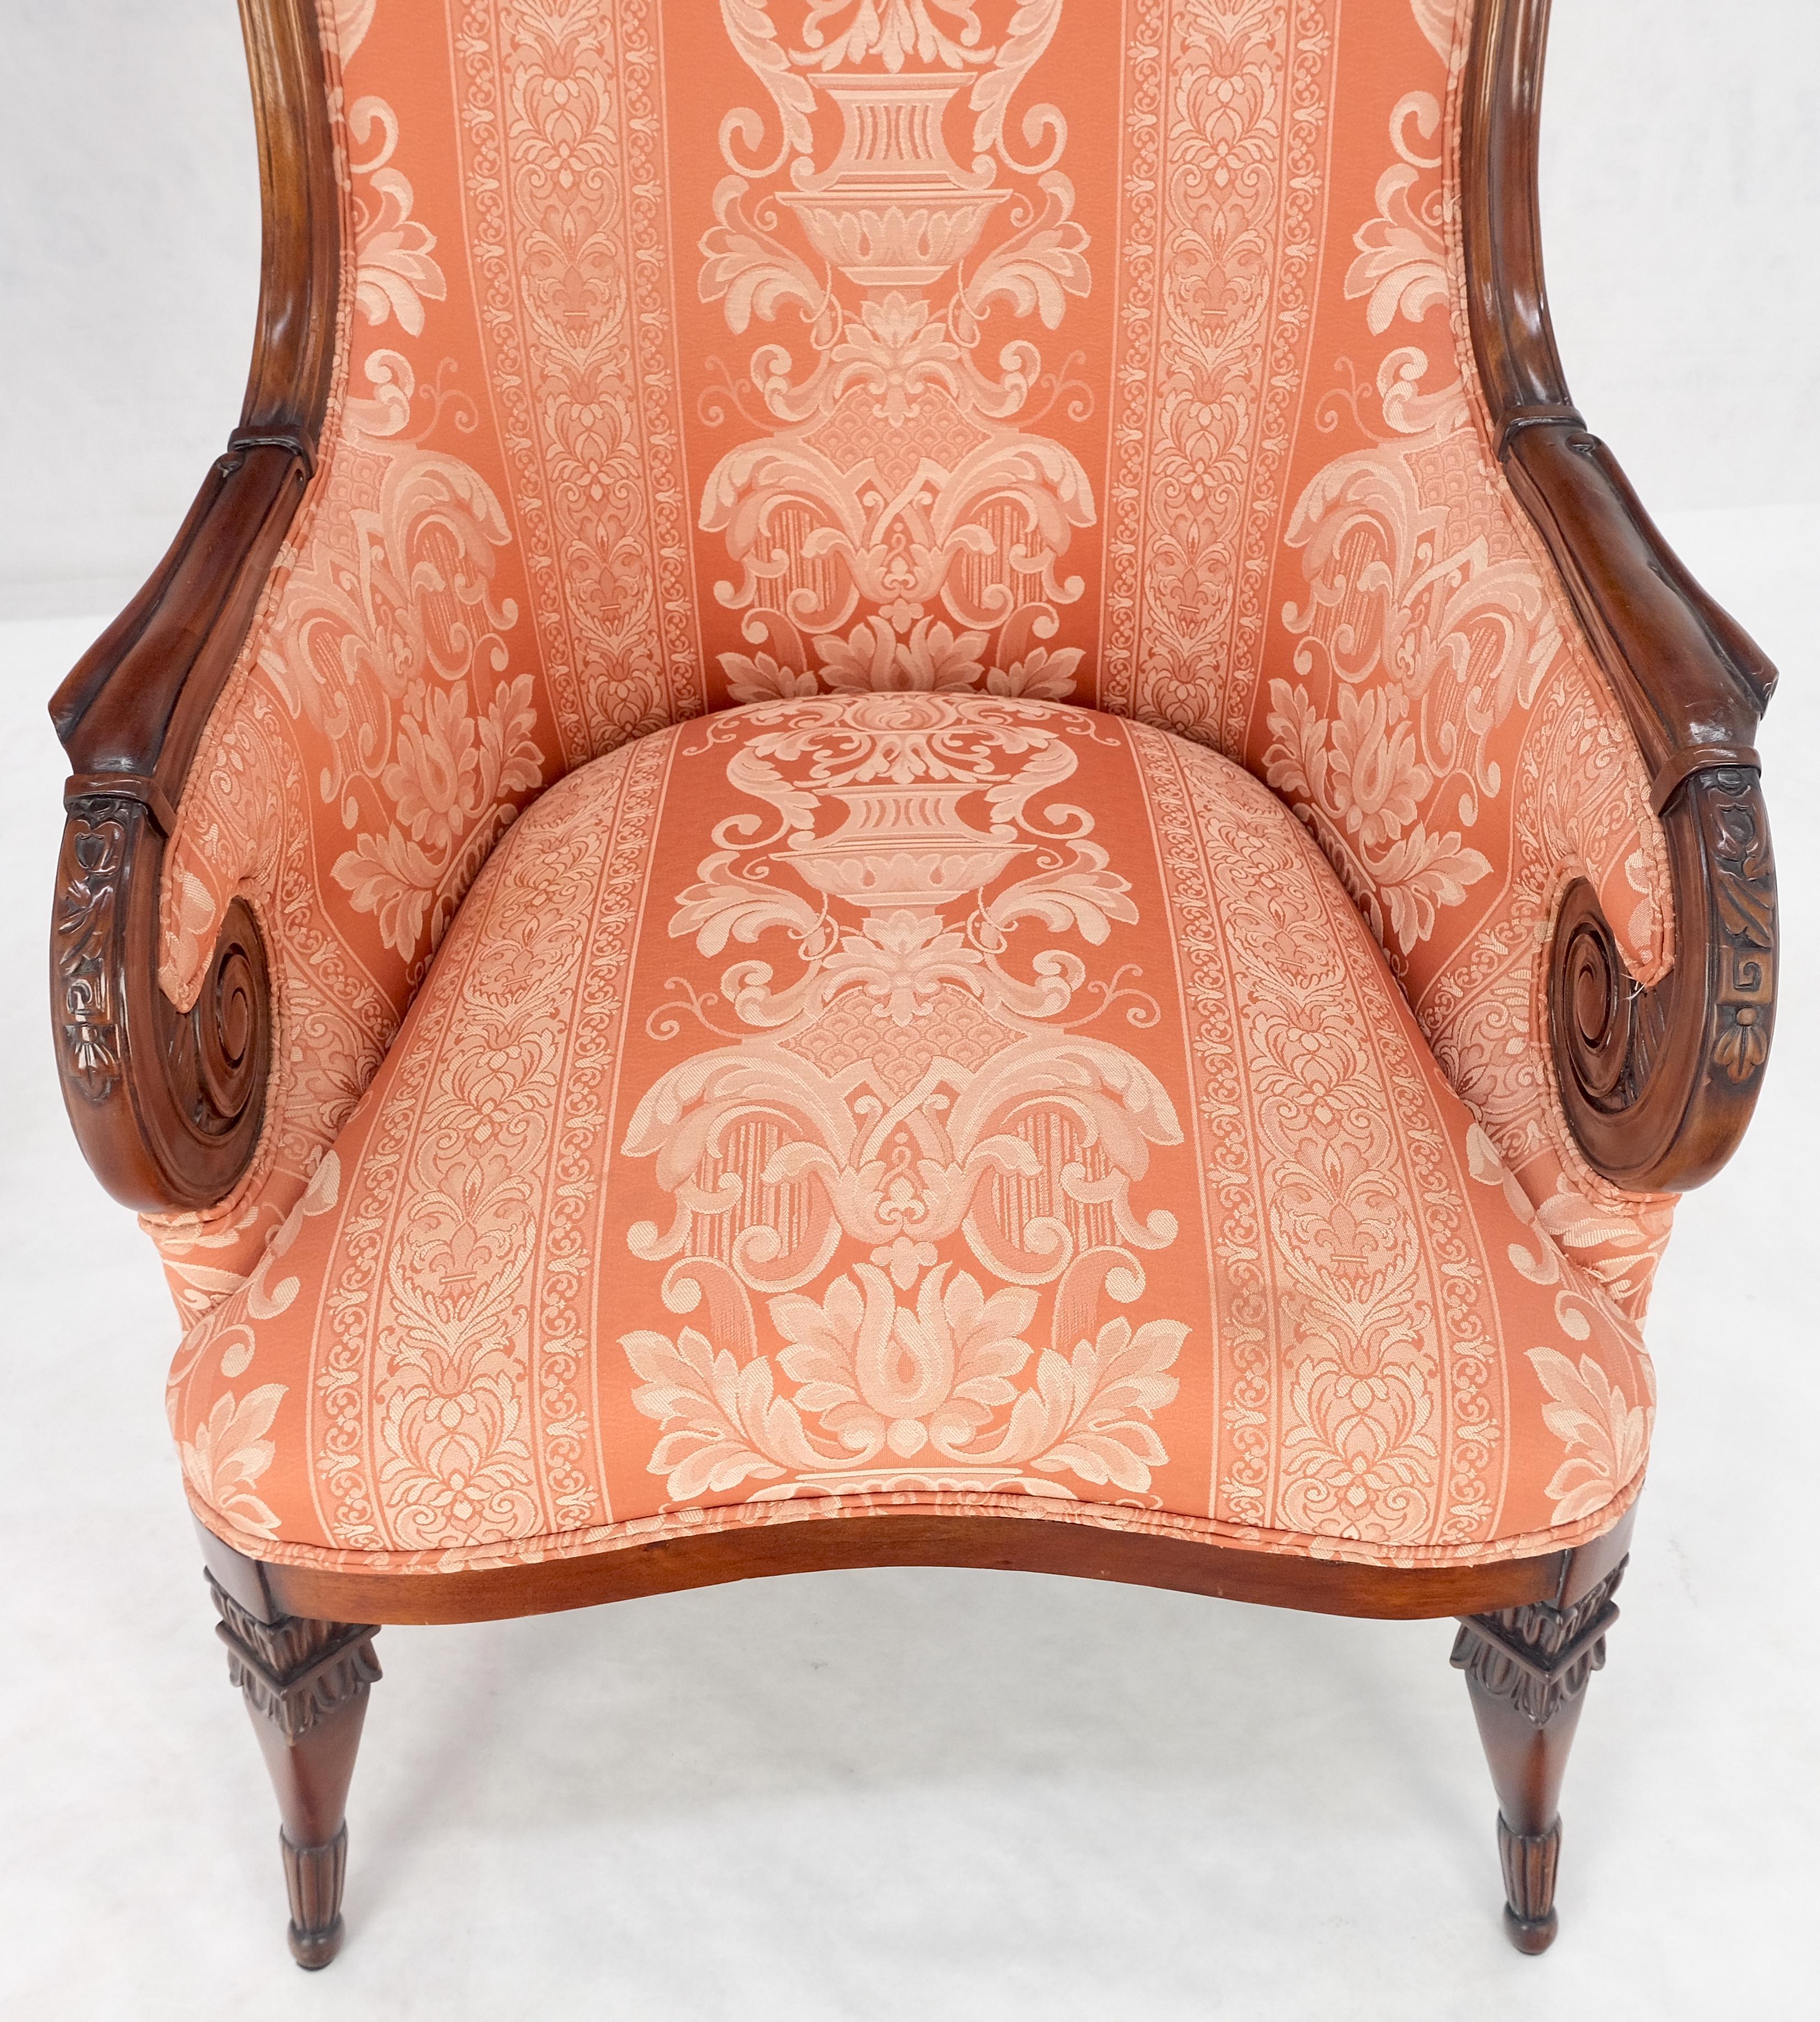 Pair of Fine Carved Mahogany Cream Silk Like Upholstery Regency Fire Side Chairs For Sale 1